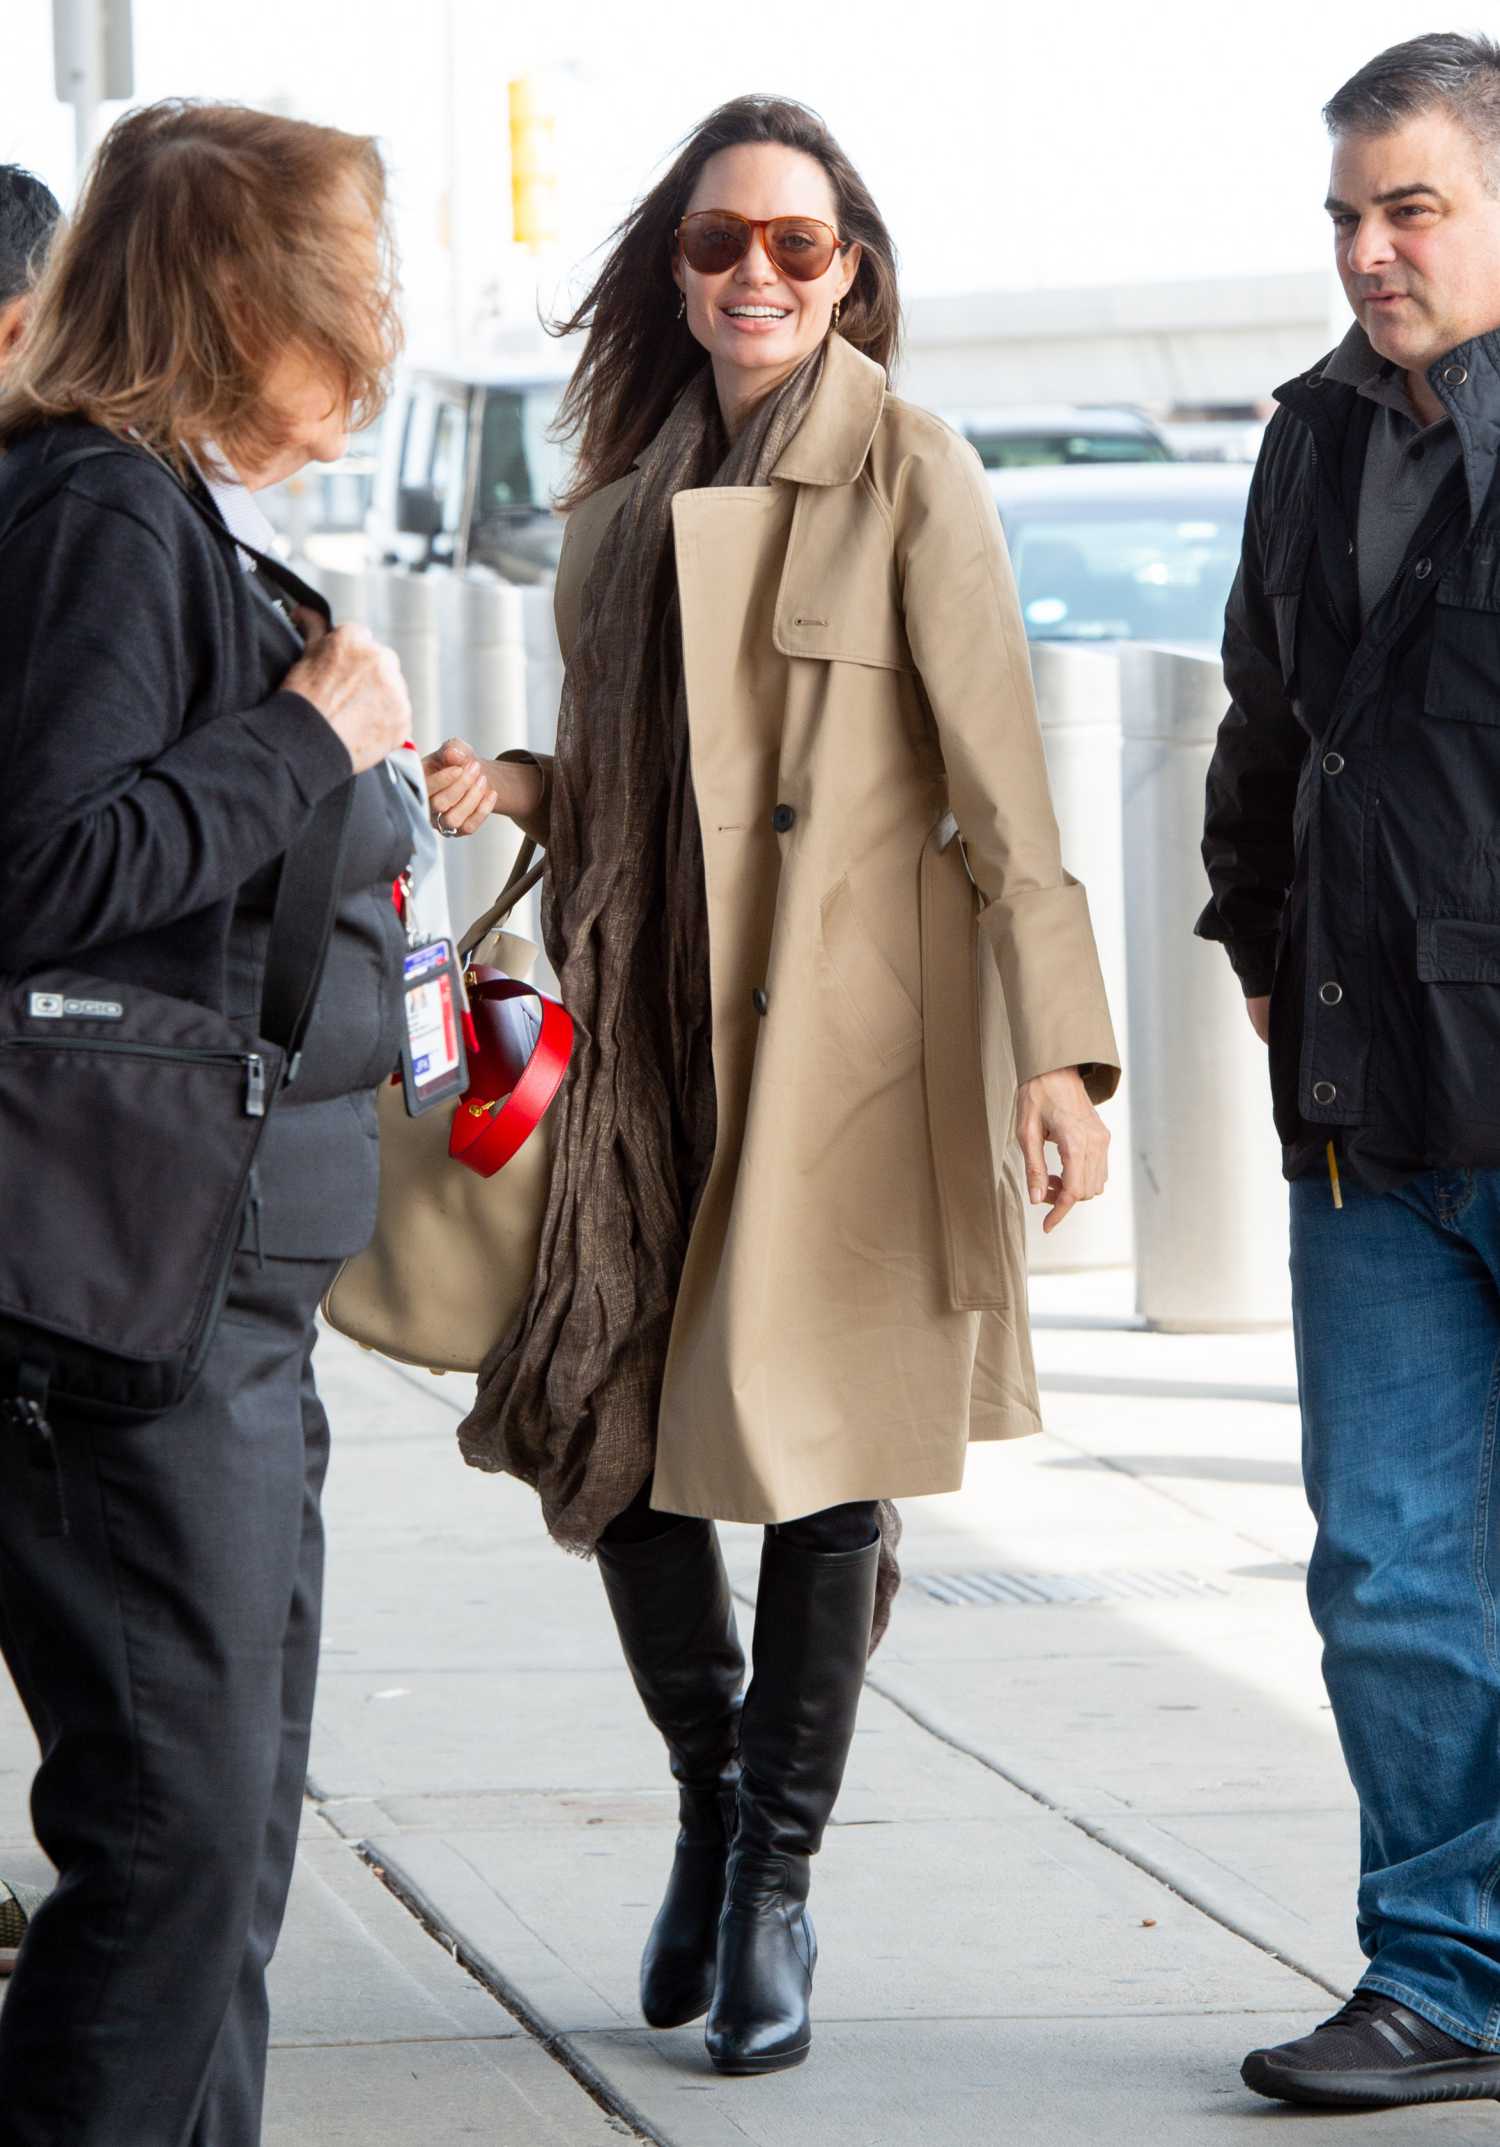 Angelina Jolie in a Beige Trench Coat Arrives at JFK Airport in NYC – Celeb Donut